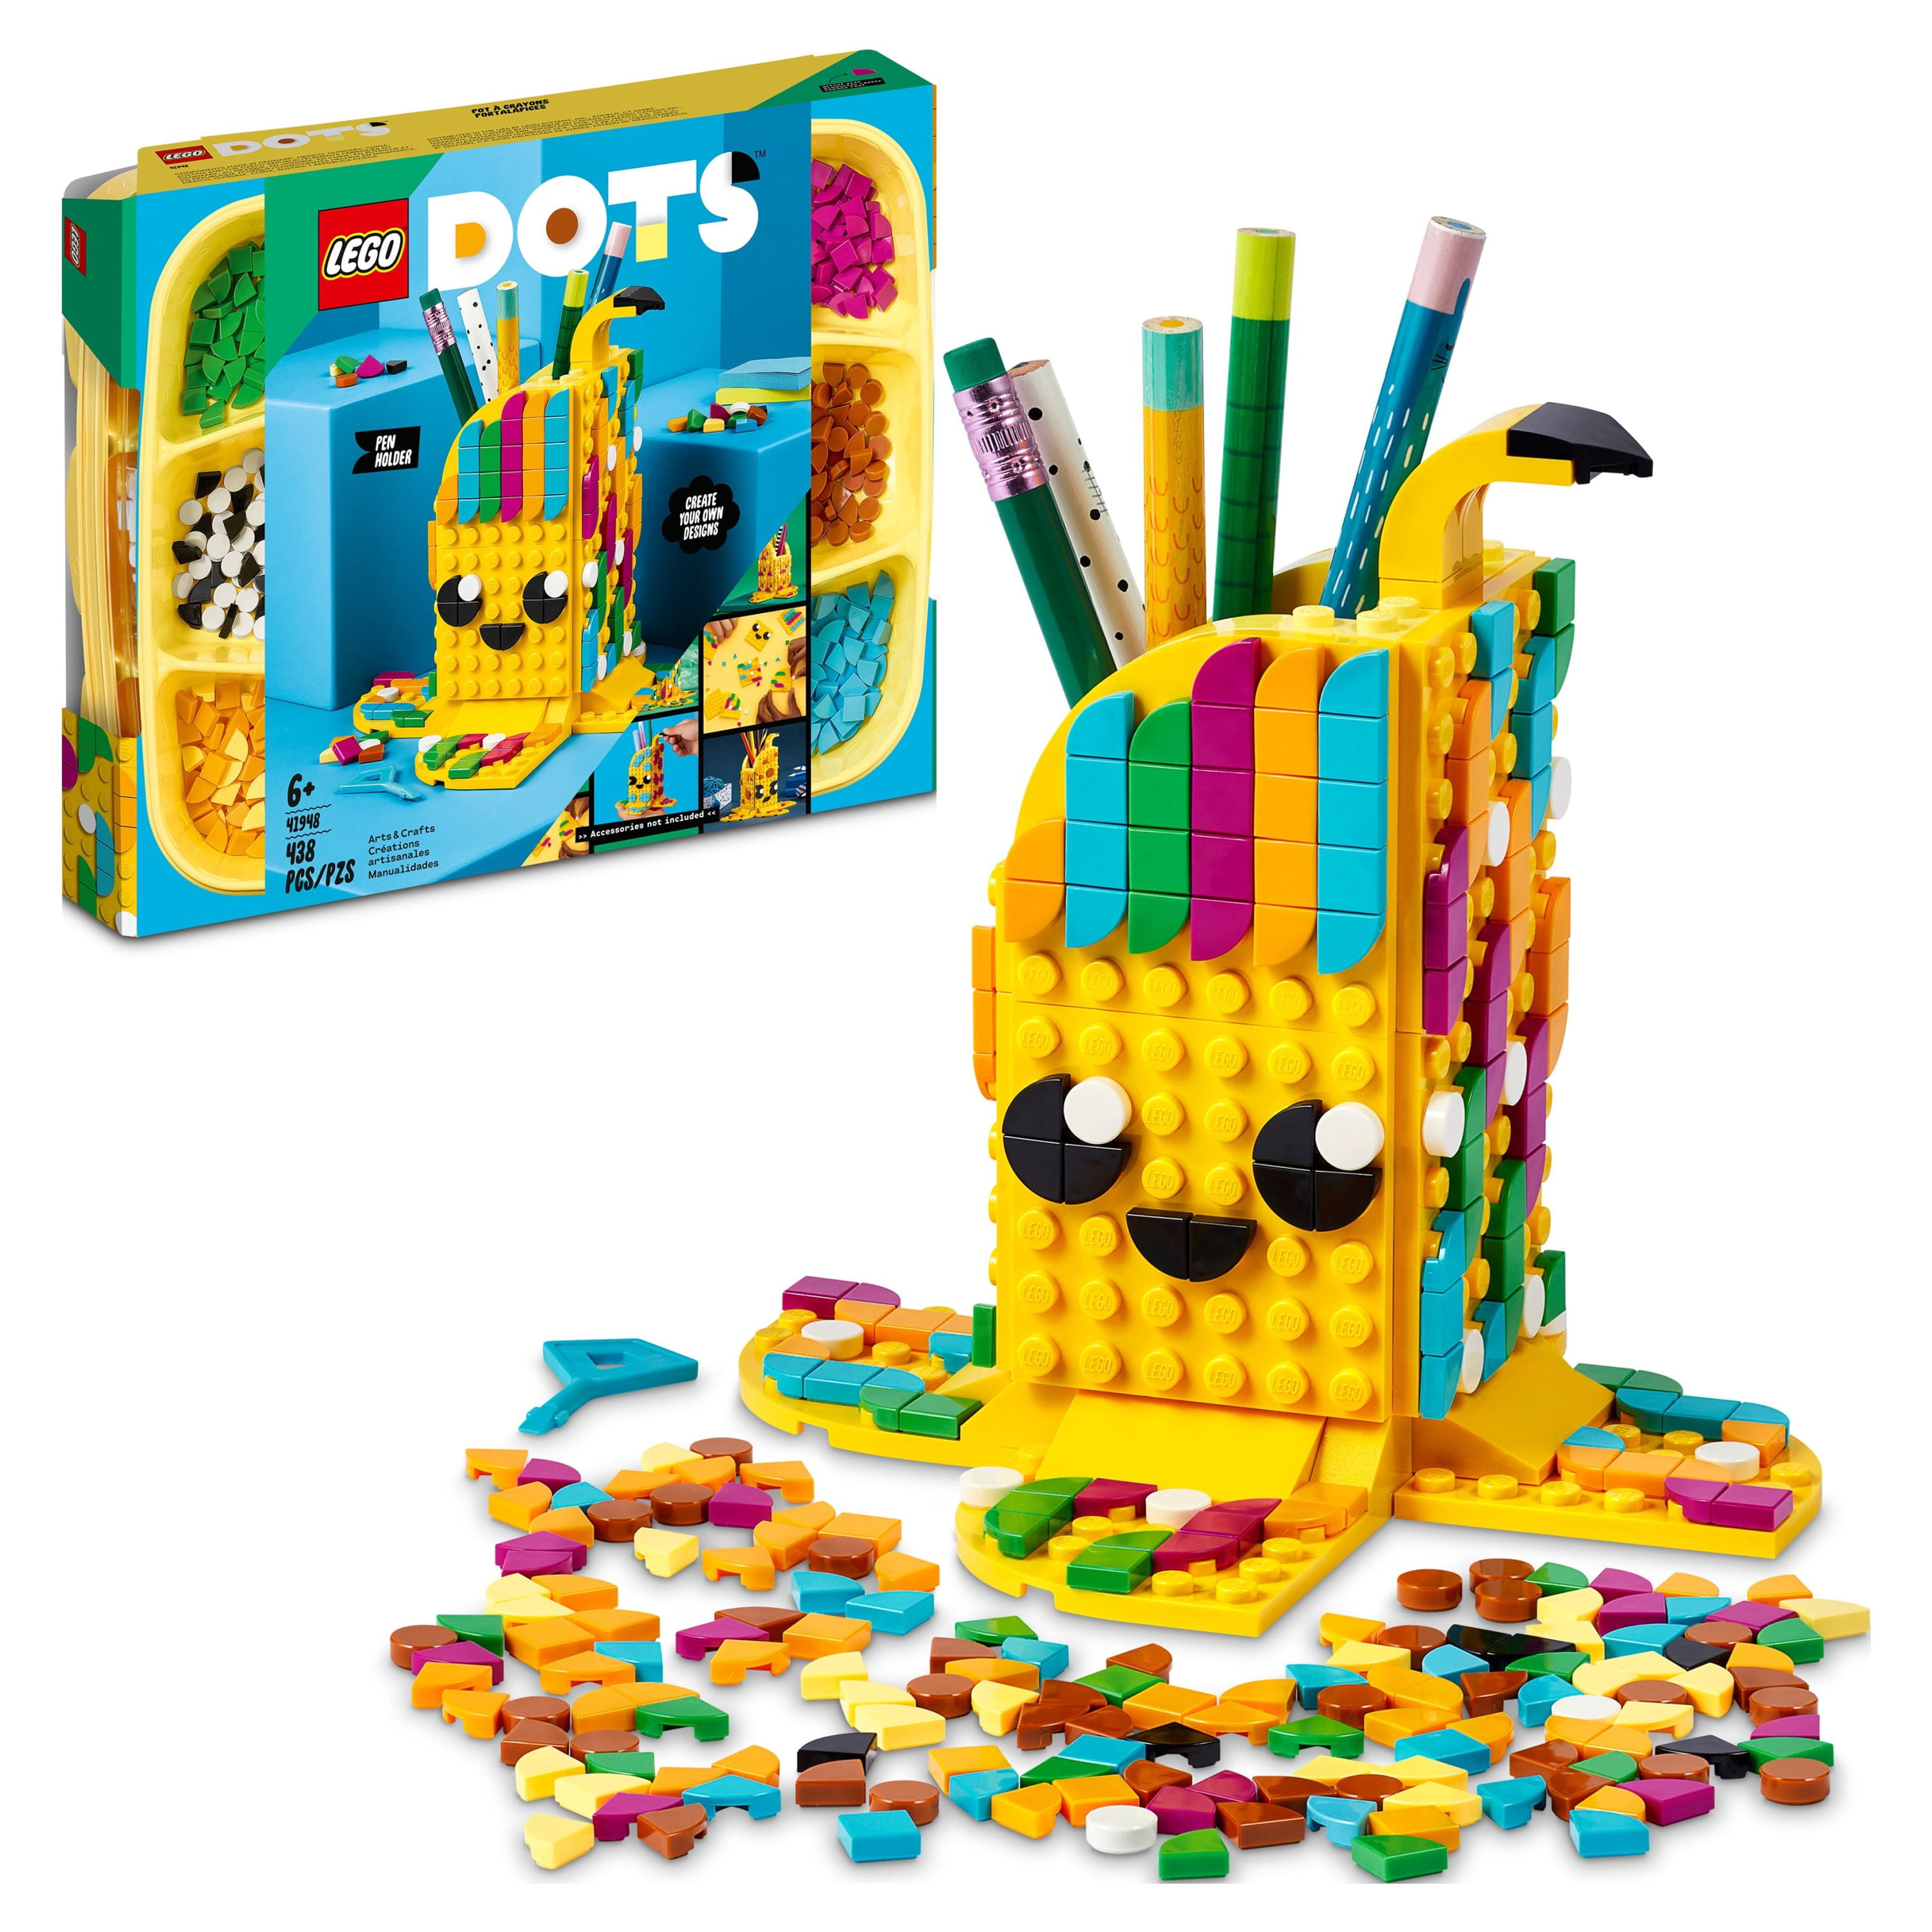 LEGO 41948 DOTS Cute Banana Pen Holder, Arts and Crafts Set, Toy Pencil Pot  Desk Organizer, DIY Bedroom Accessories, Gifts for Kids, Girls & Boys 6  Plus Years Old 